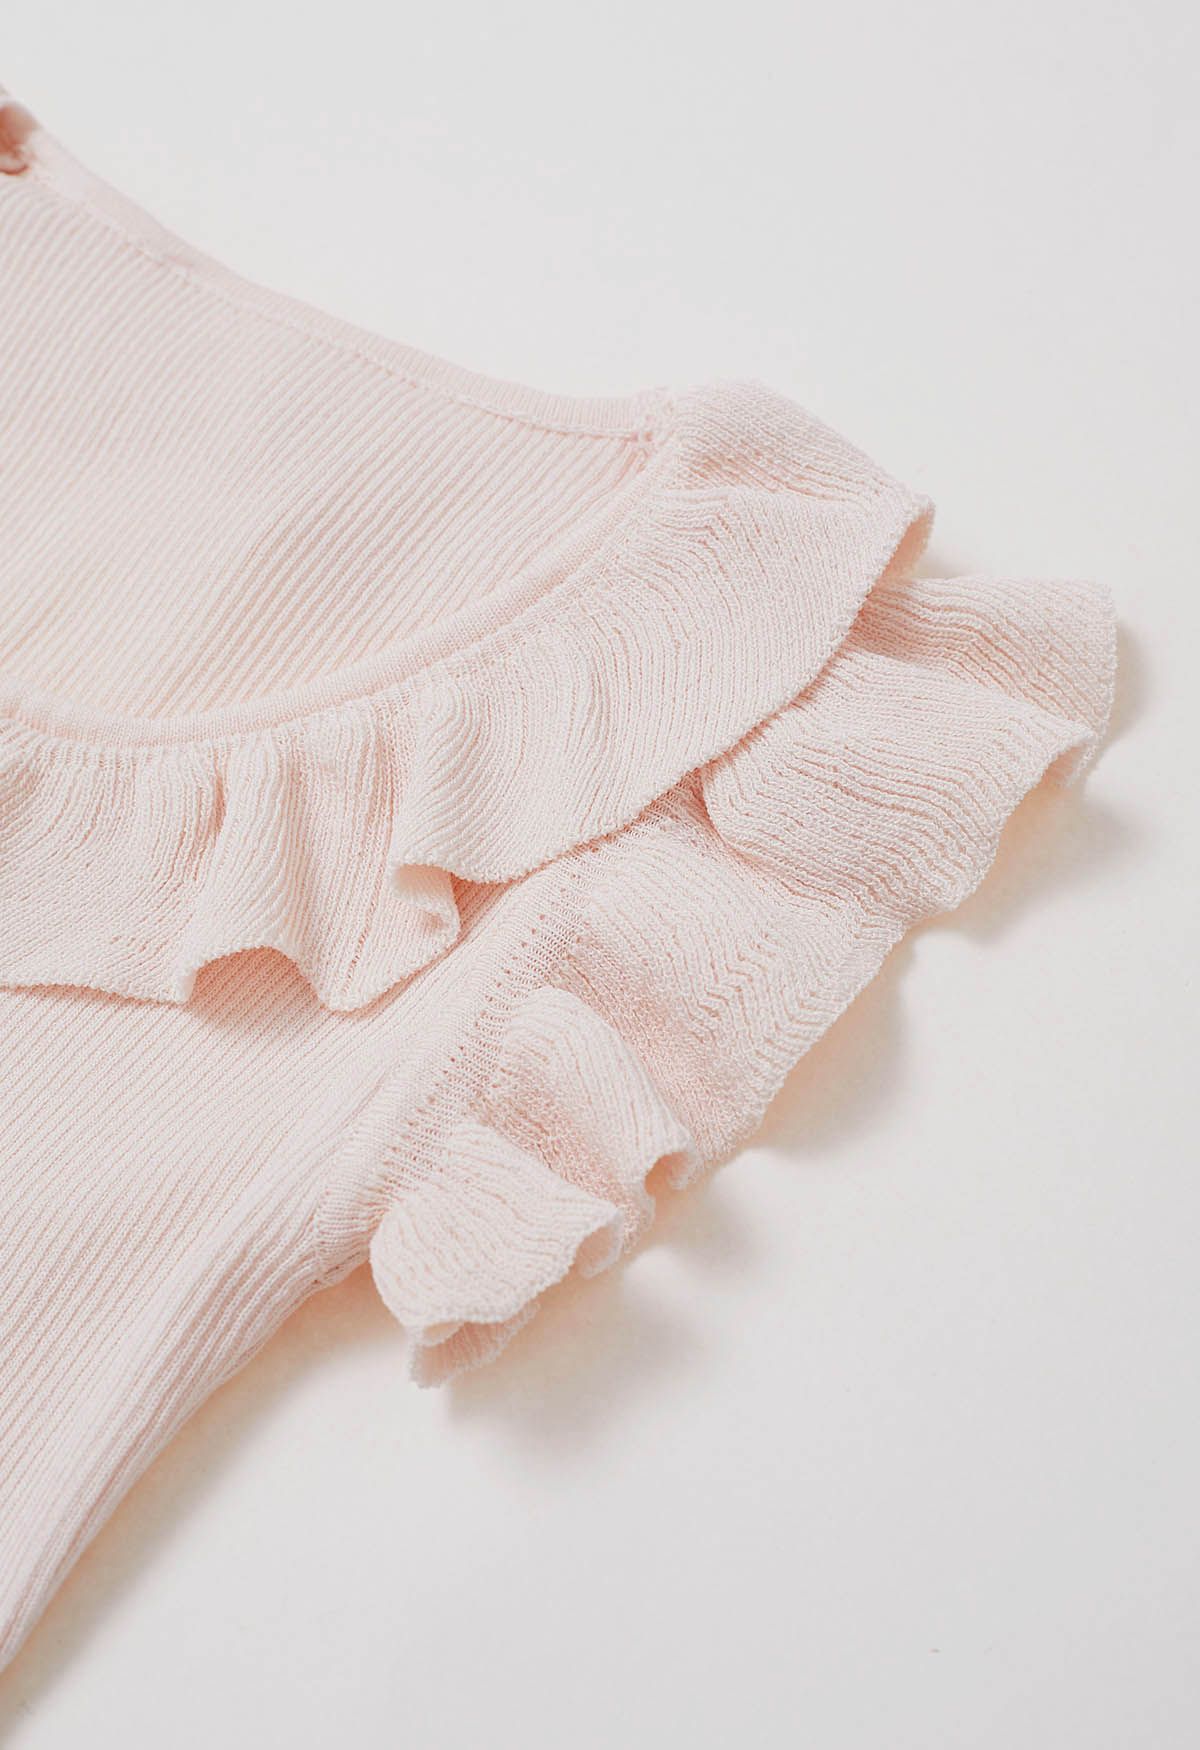 Ethereal Ruffle Sleeveless Knit Top in Light Pink